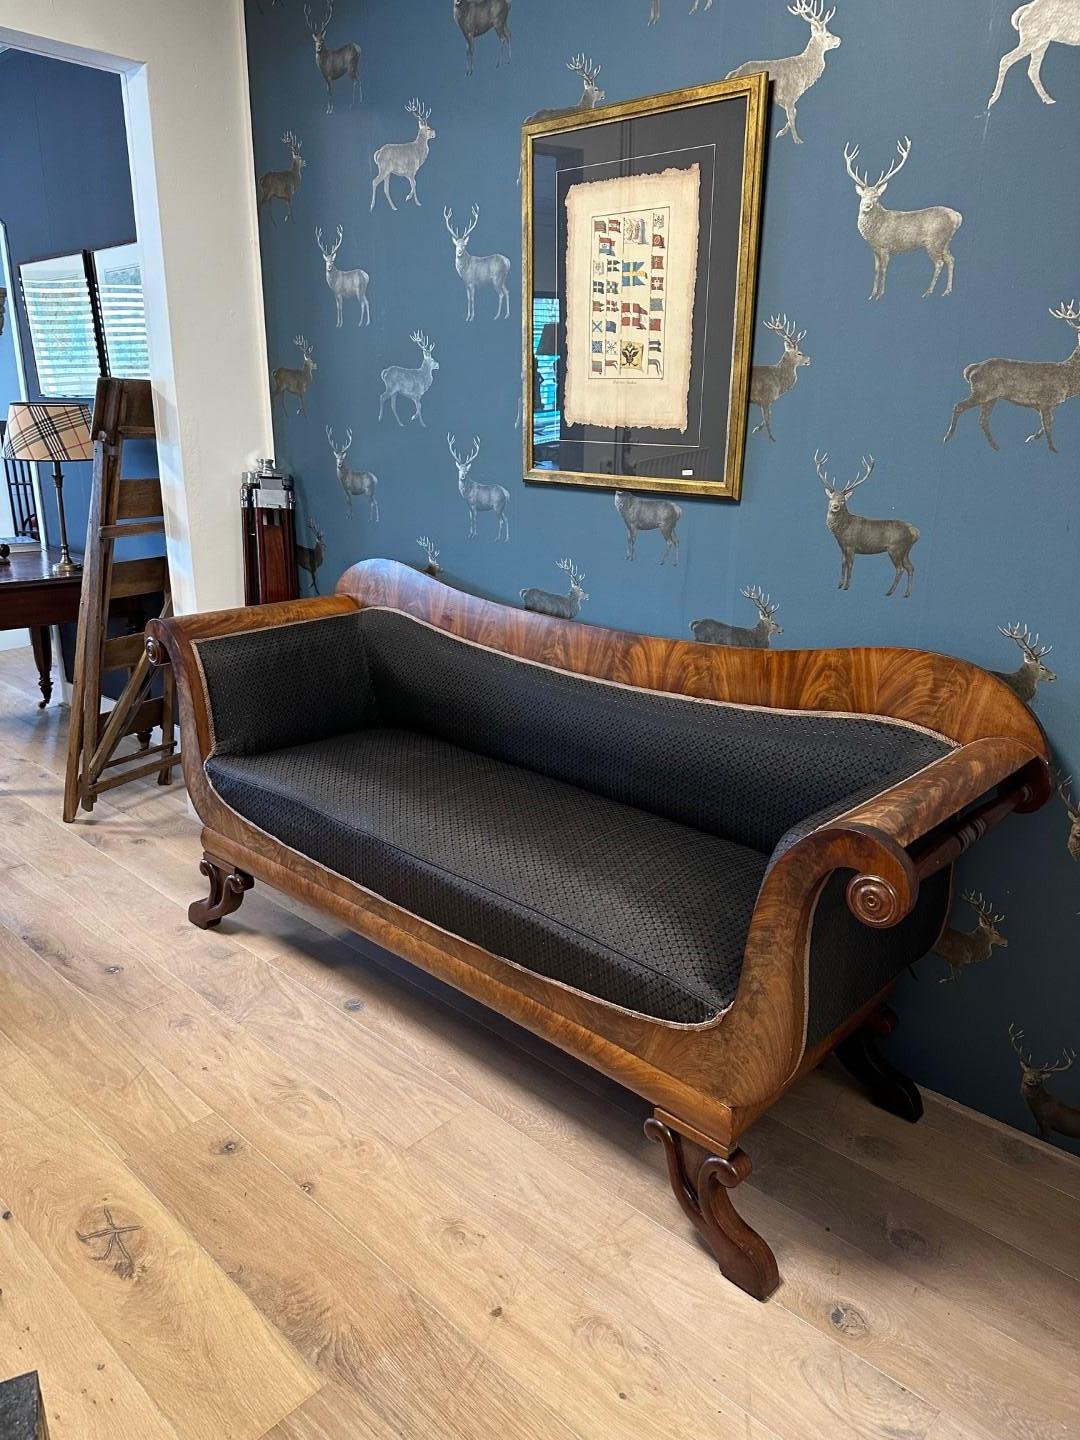 Antique mahogany Biedermeier sofa in used condition. Beautiful model with beautiful mahogany.
Origin: Netherlands
Period: Approx. 1835-1850
Size: 202cm x 60cm x h.93cm